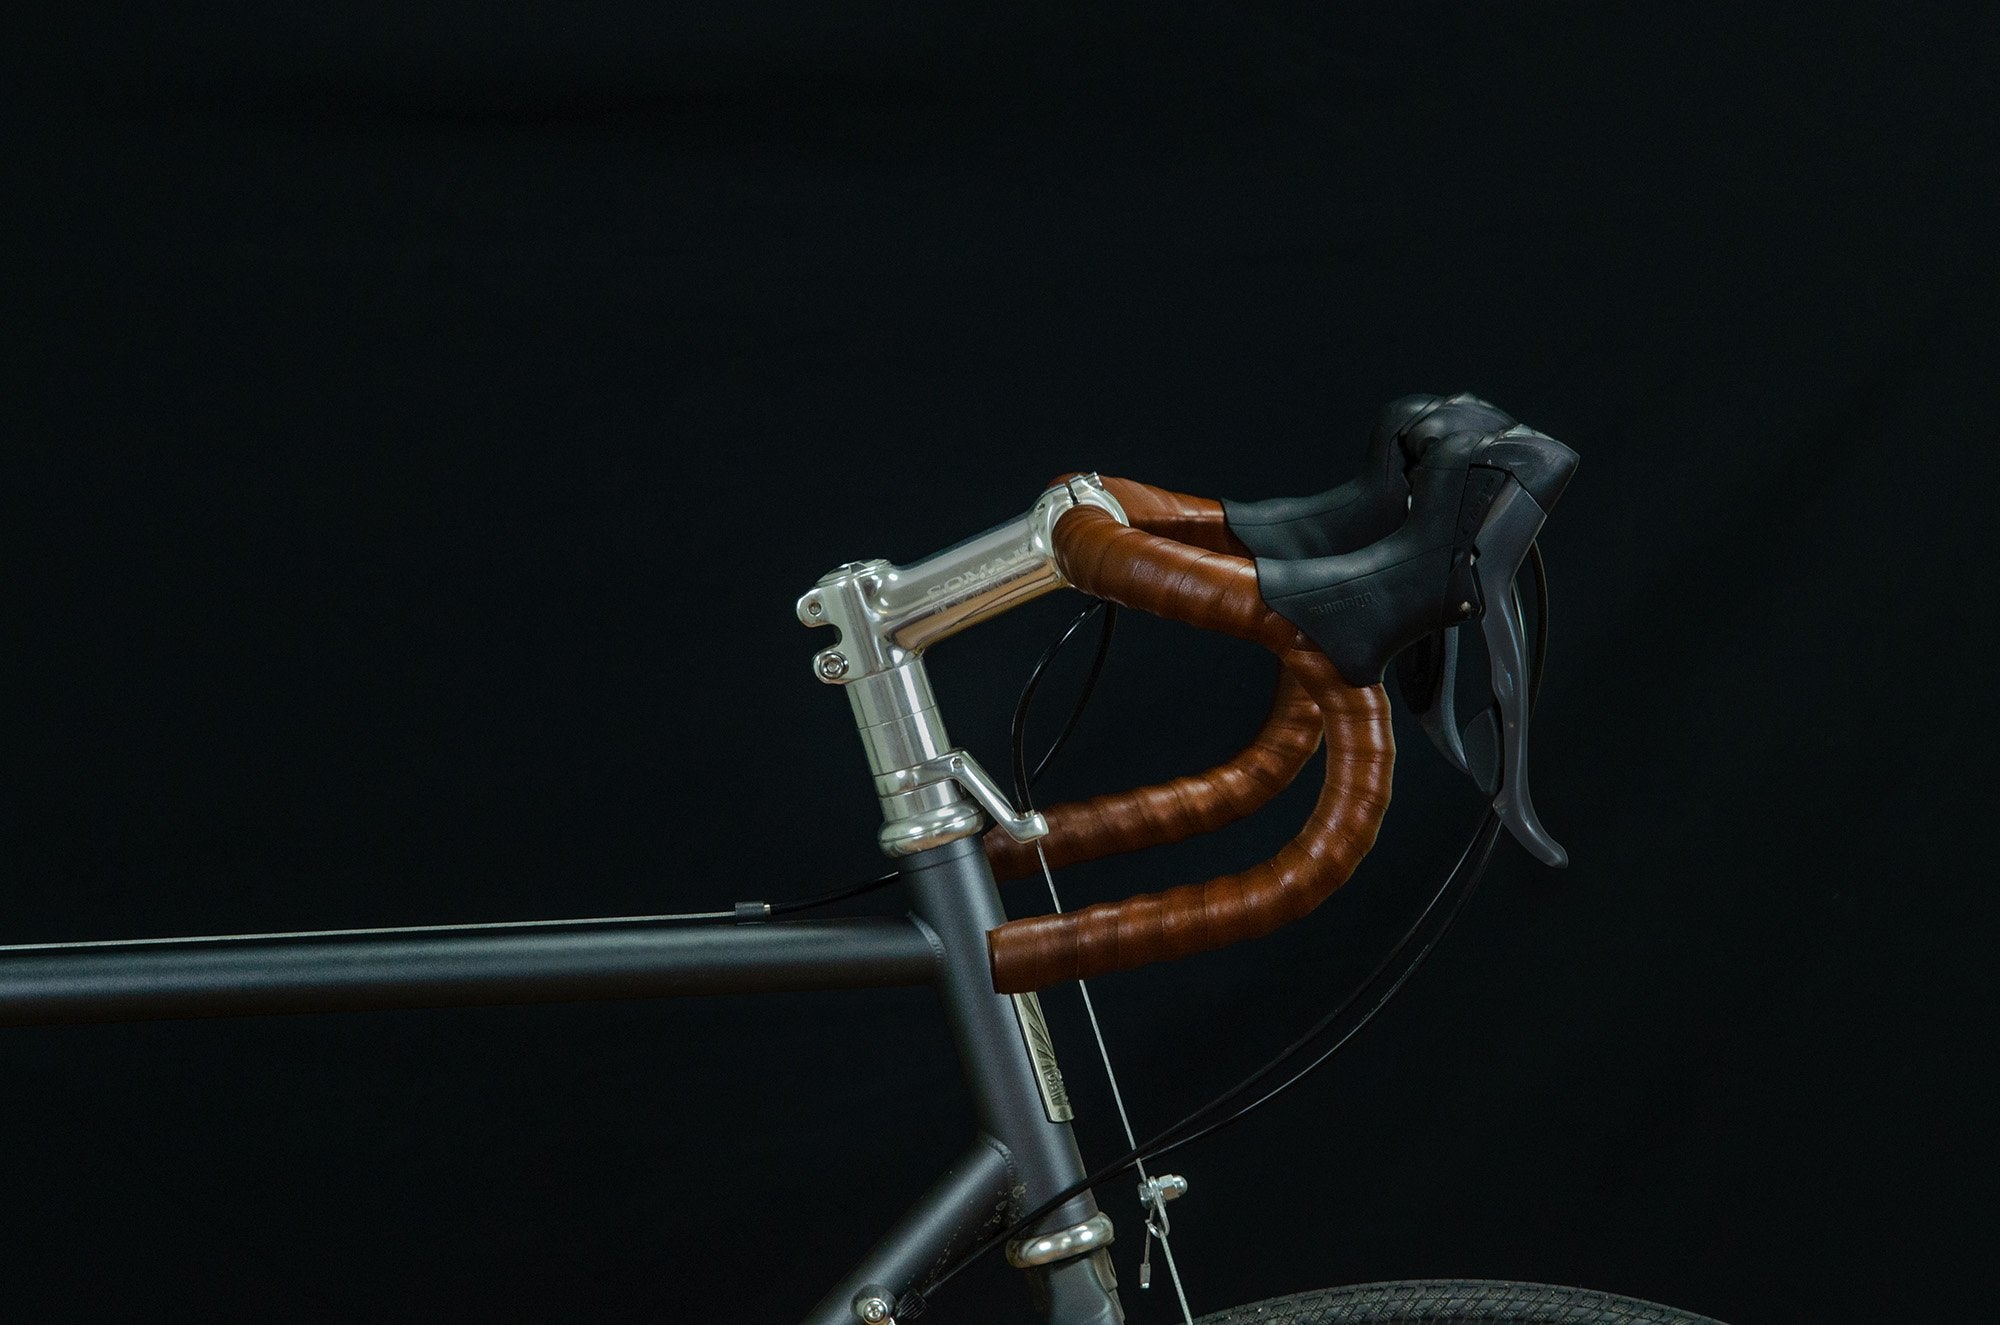 Leh Cycling Goods — Handcrafted Leather Bar Tape & Grips